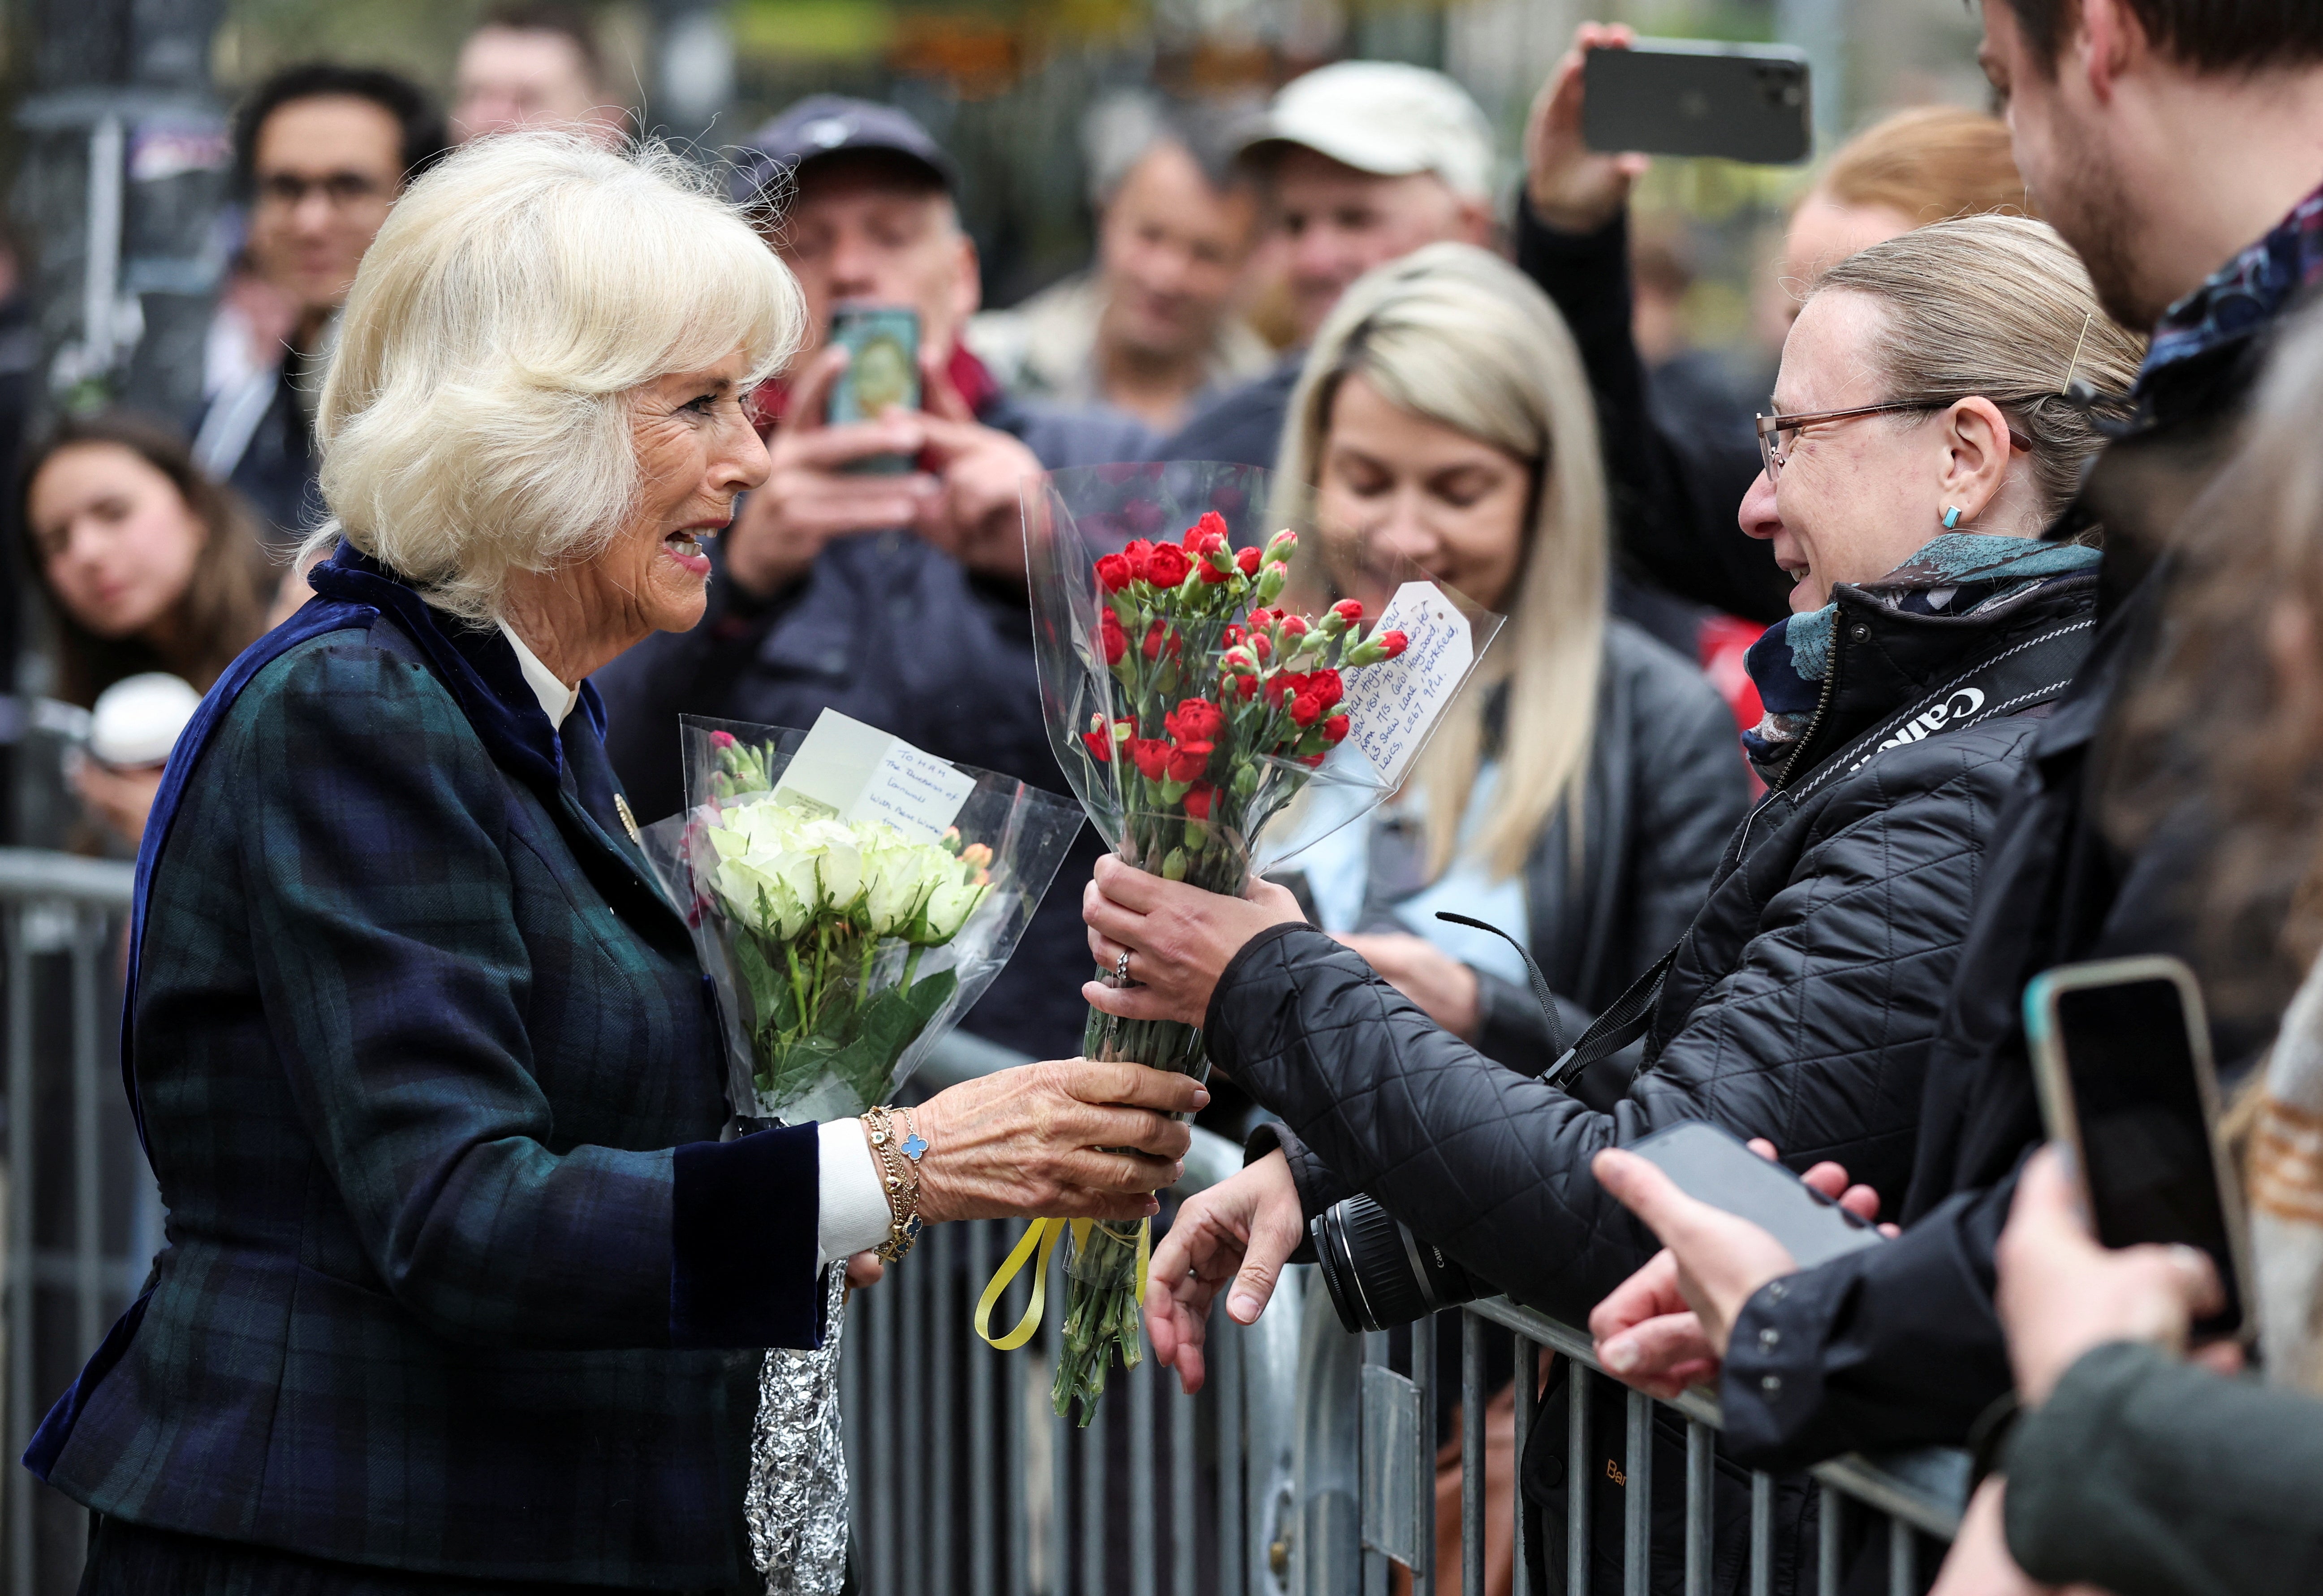 The Duchess of Cornwall meets with well wishers after attending the exhibition (Phil Noble/PA)